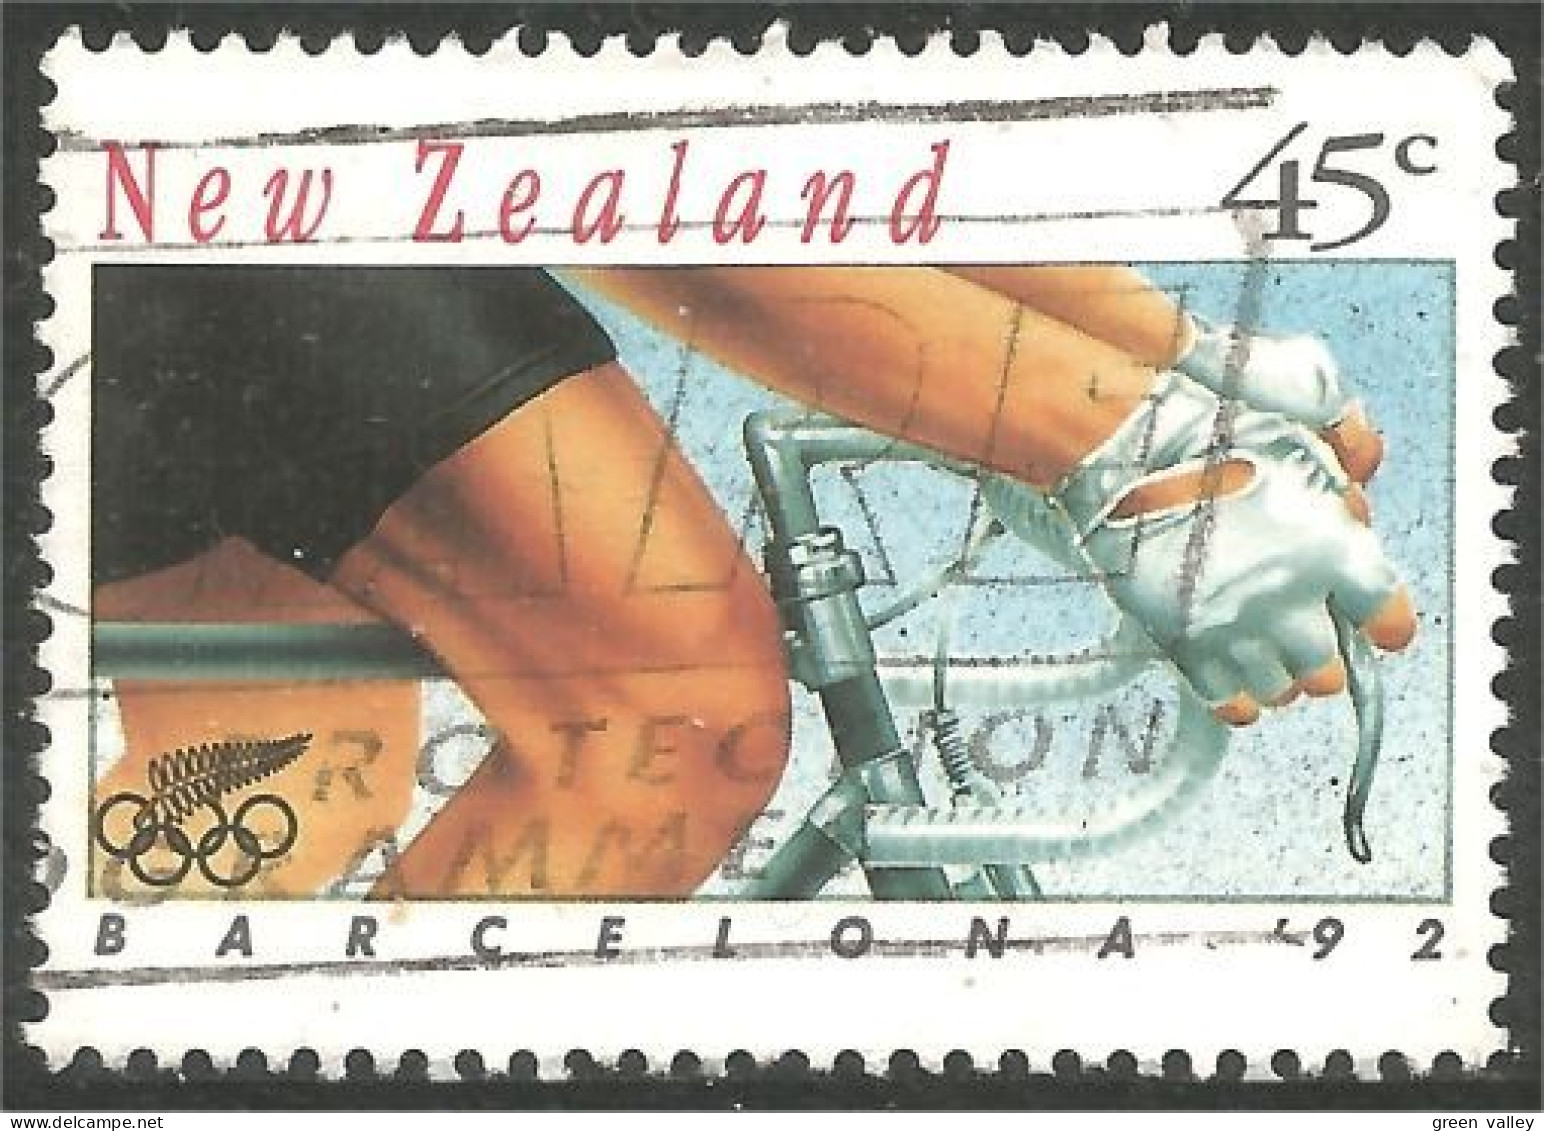 706 New Zealand Olympics Barcelona Cycling Bicycle Race Fahrrad Bicyclette Vélo Cyclisme (NZ-155a) - Used Stamps